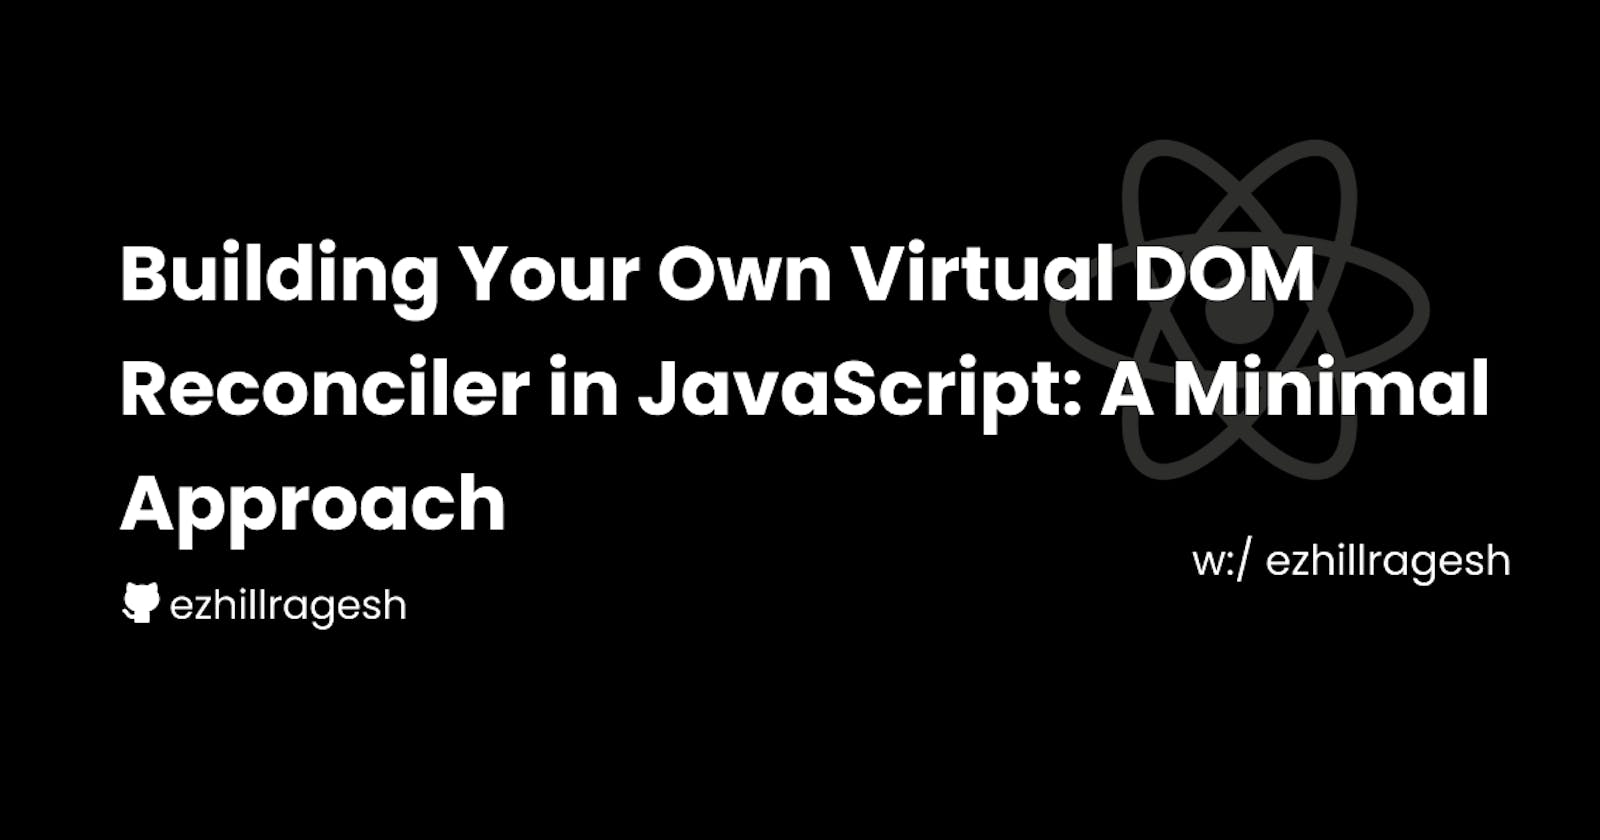 Building Your Own Virtual DOM Reconciler in JavaScript: A Minimal Approach